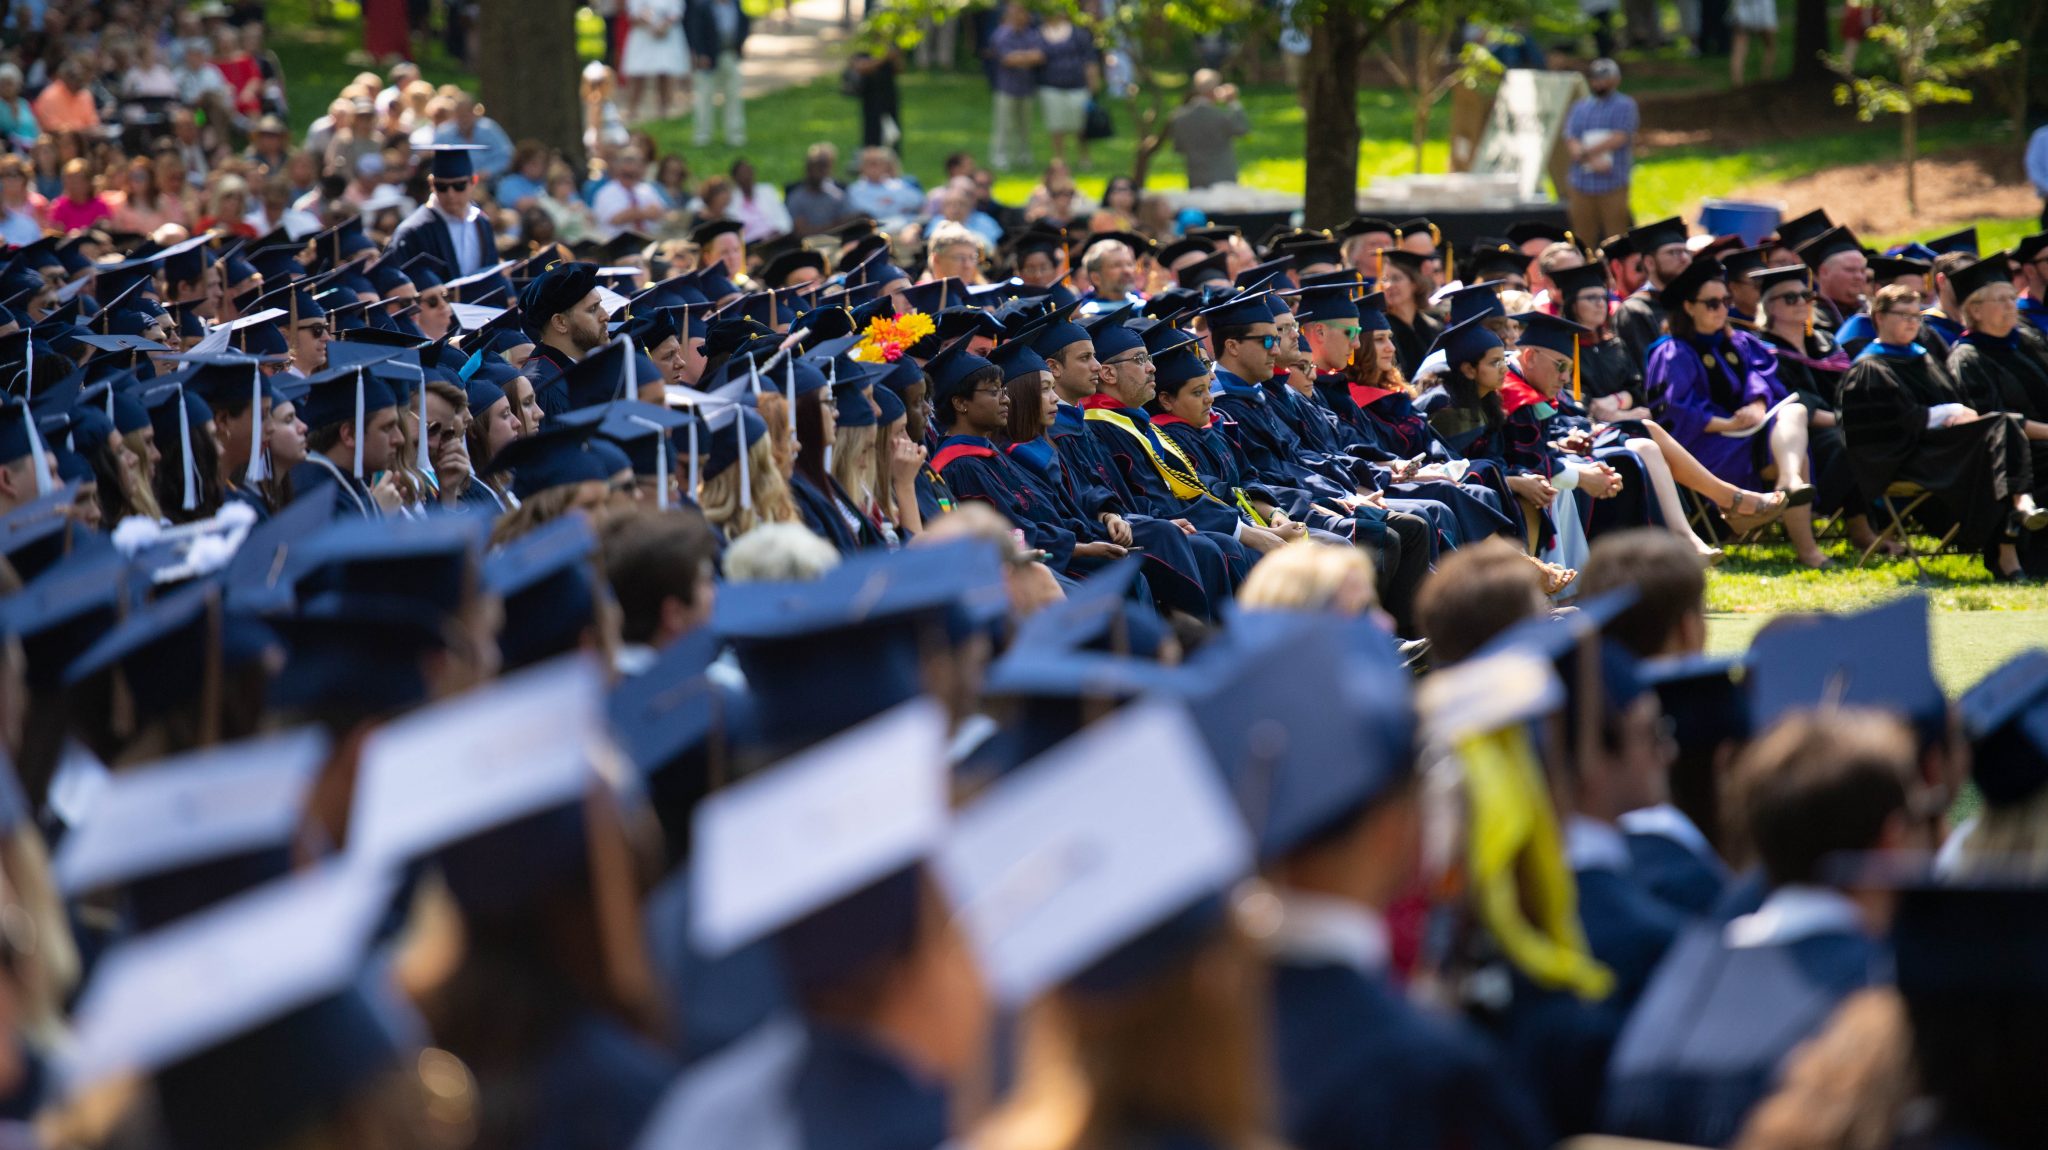 A Quick Guide to UM's 166th Commencement - Ole Miss News